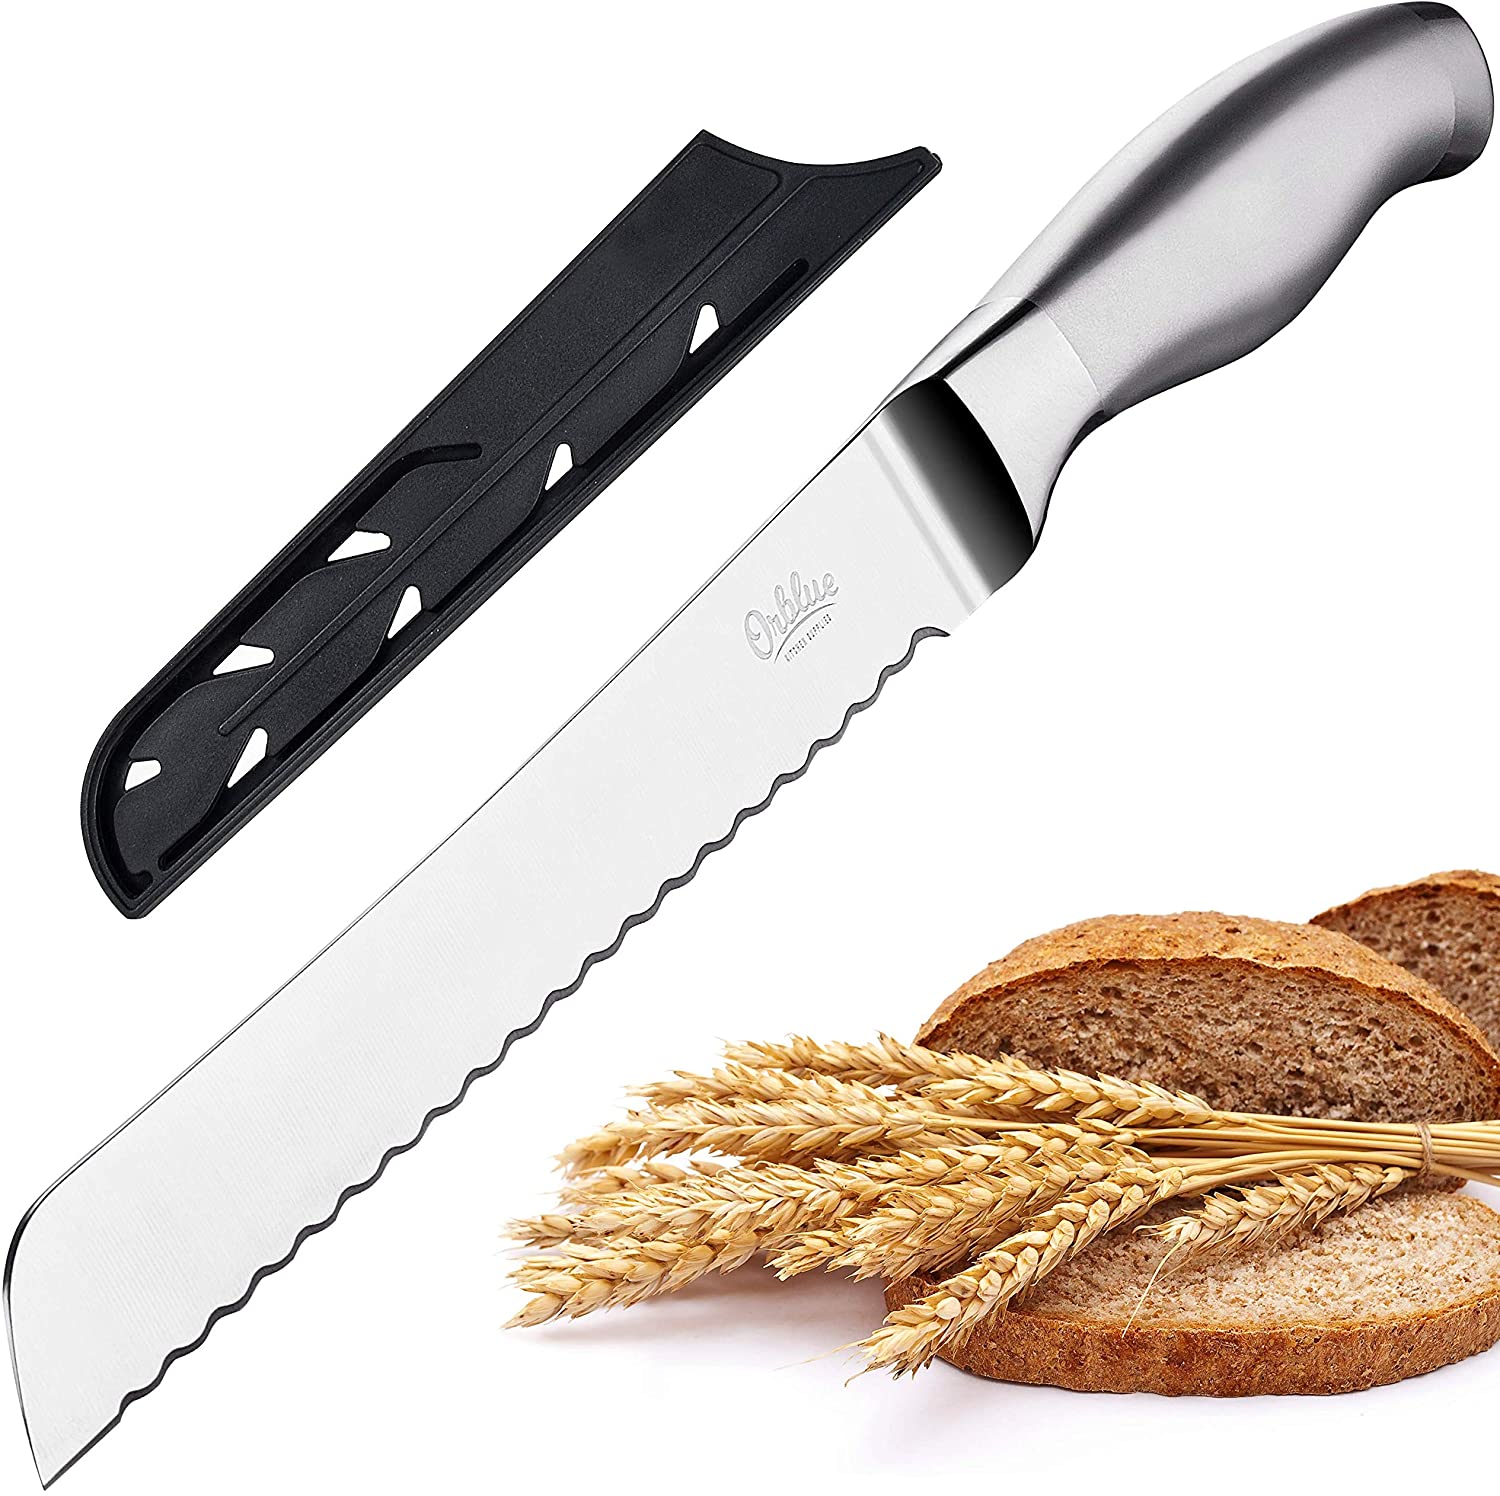 Orblue Serrated Bread Knife with Upgraded Stainless Steel Razor Sharp Wavy Edge Width - Bread Cutter Ideal for Slicing Homemade Bread, Bagels, Cake